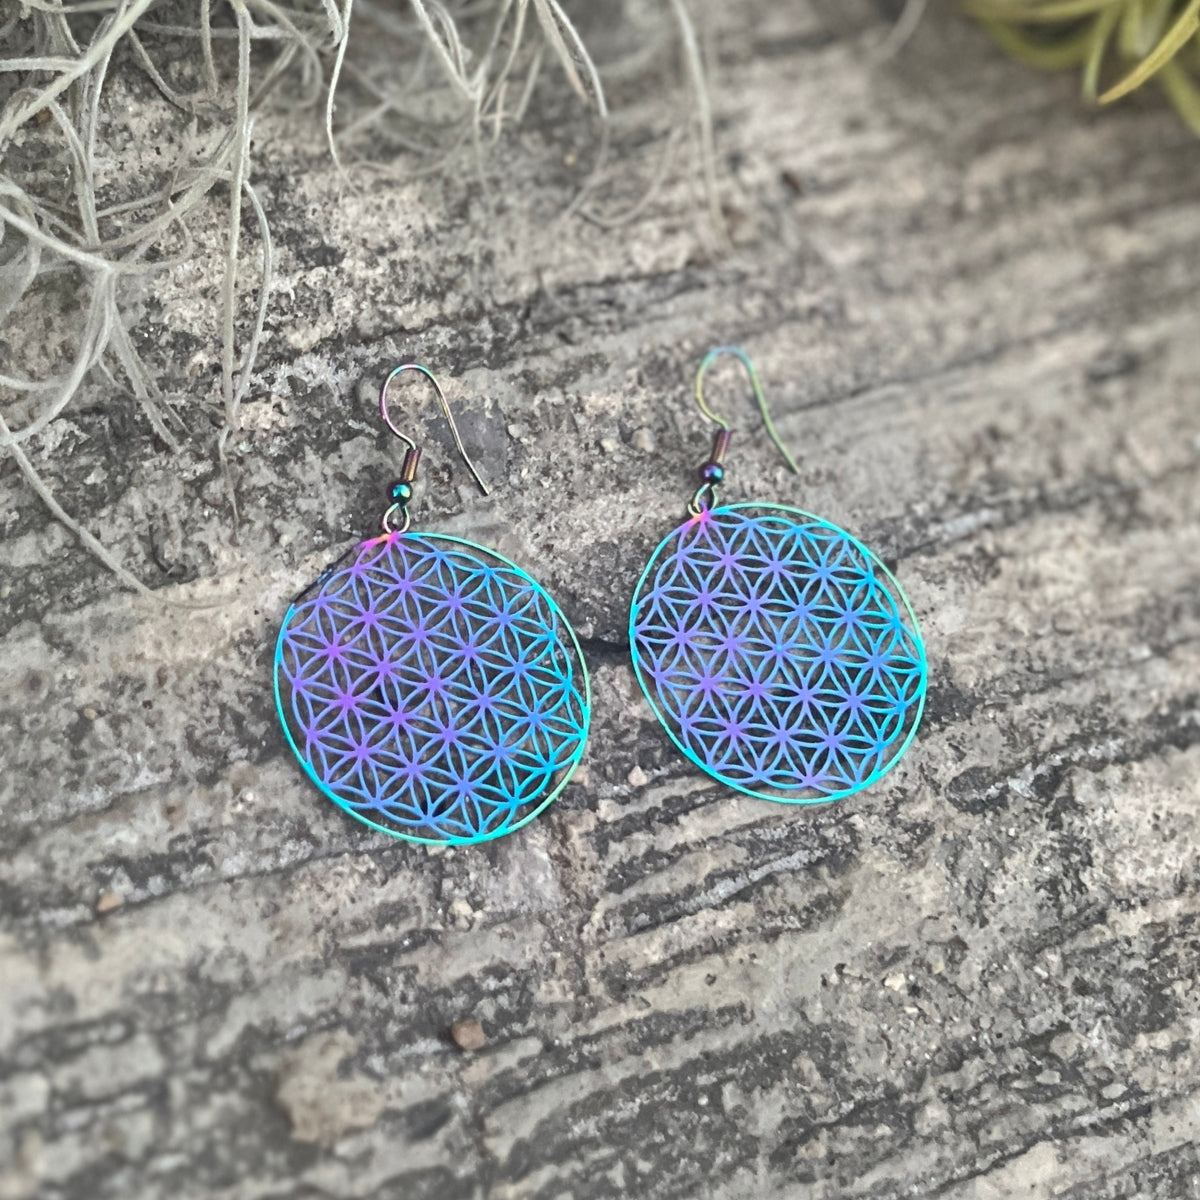 <strong>Wear the "Rainbow Flower of Life Earrings" to infuse your look with the vibrant colors of the rainbow and let them be a symbol of your unique, bohemian journey</strong>.